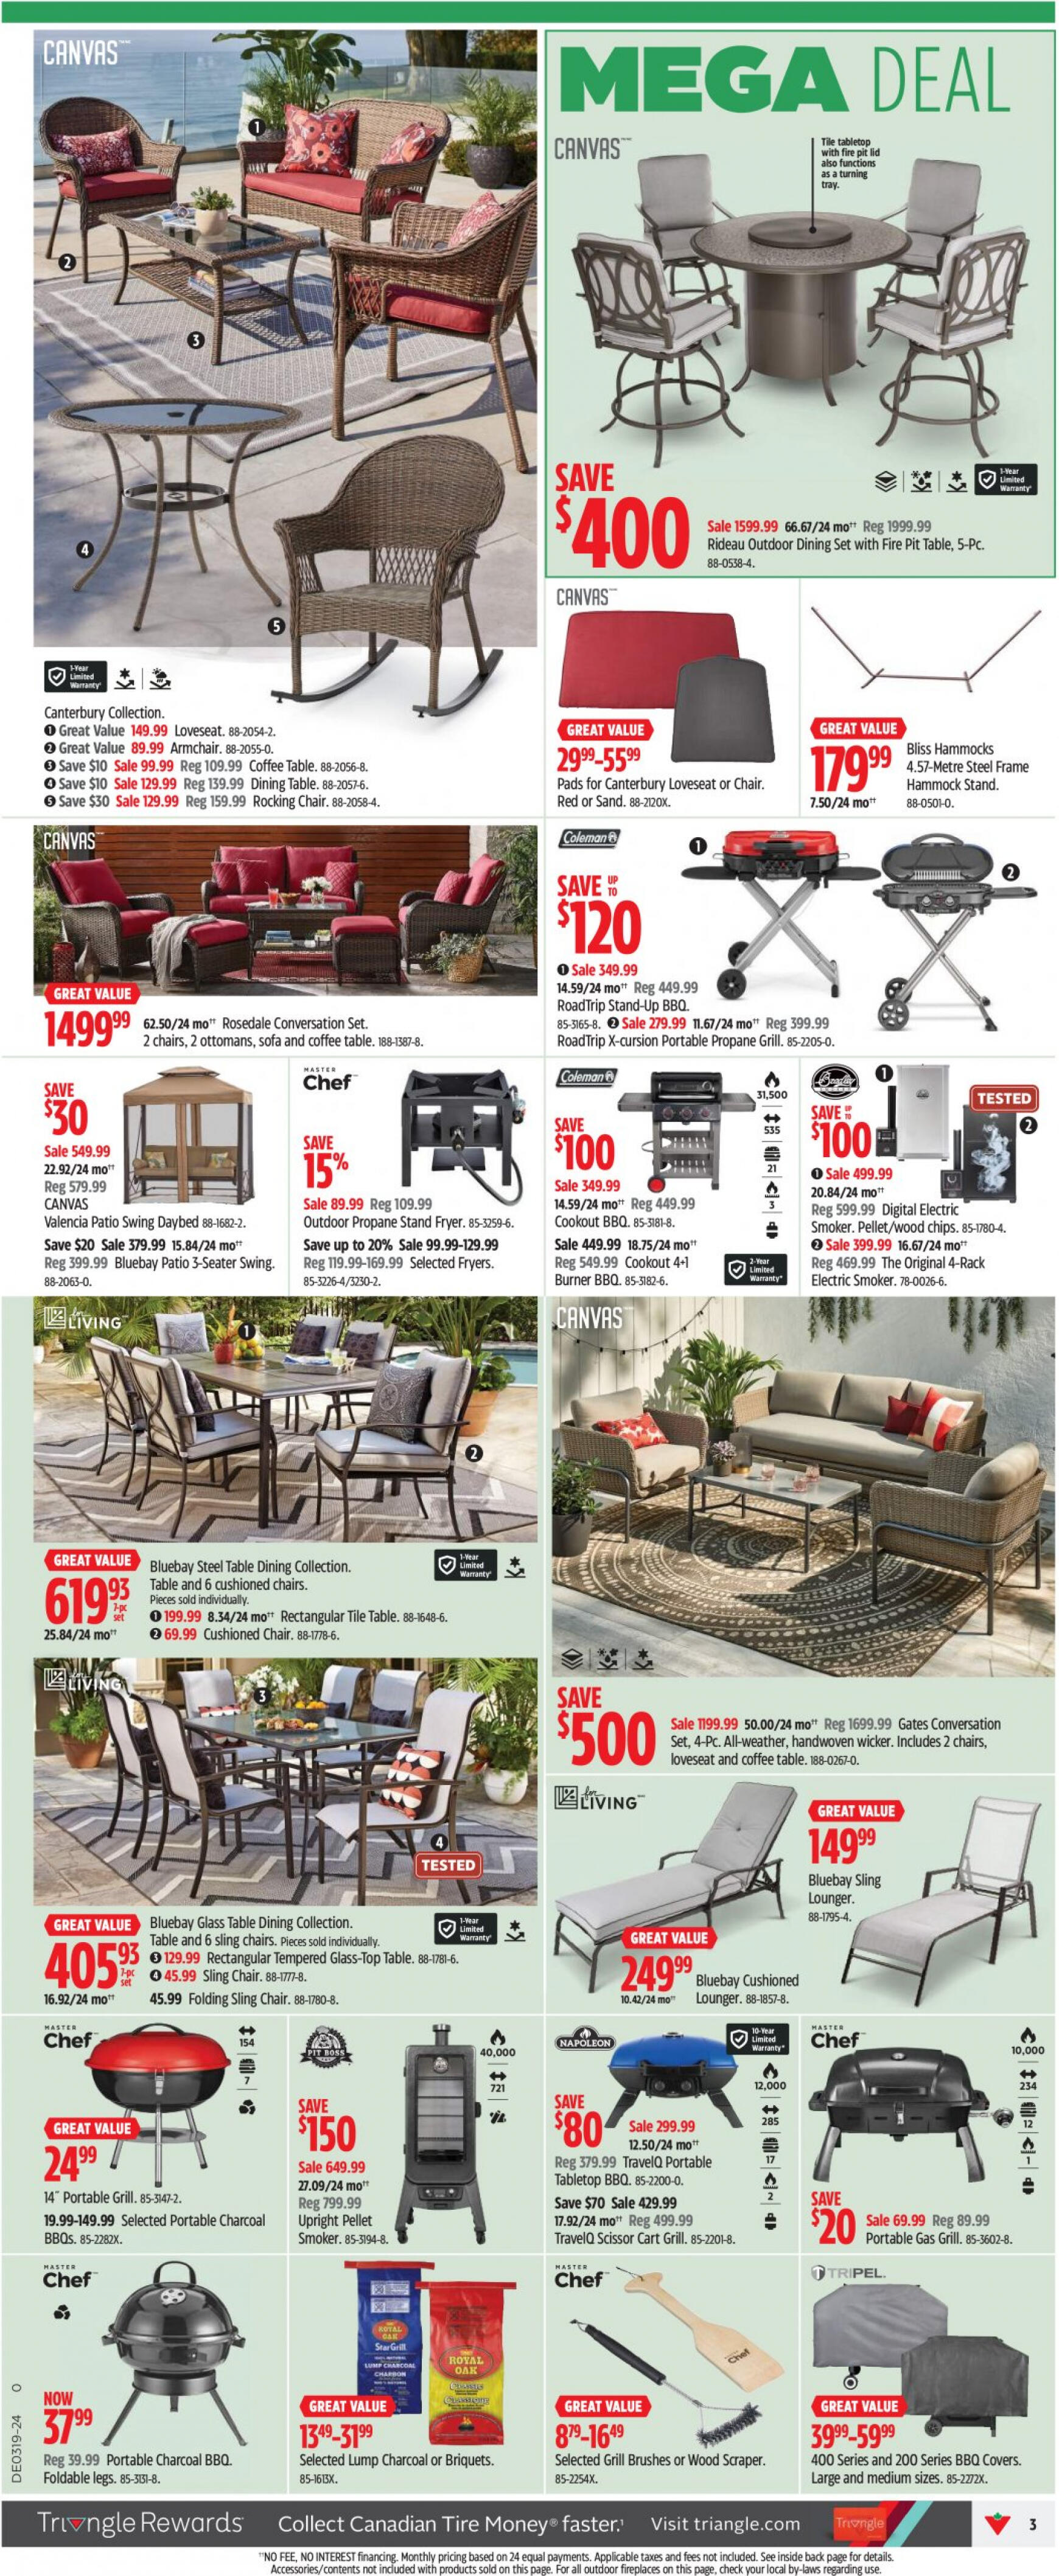 canadian-tire - Canadian Tire flyer current 02.05. - 08.05. - page: 3